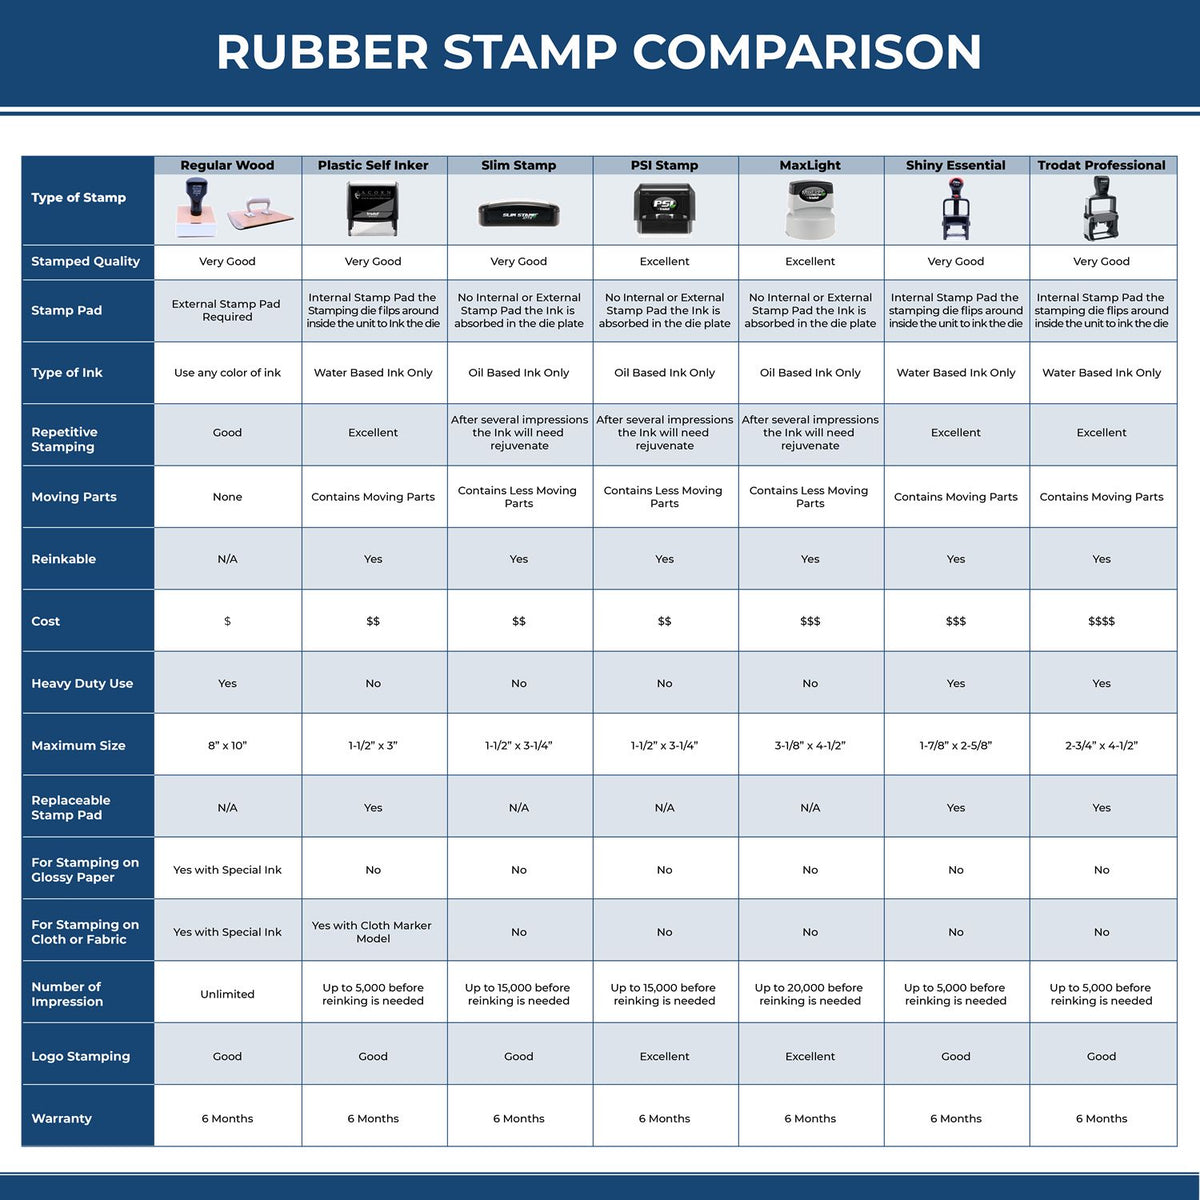 Large Self Inking Outline Copy Stamp 4115S Rubber Stamp Comparison